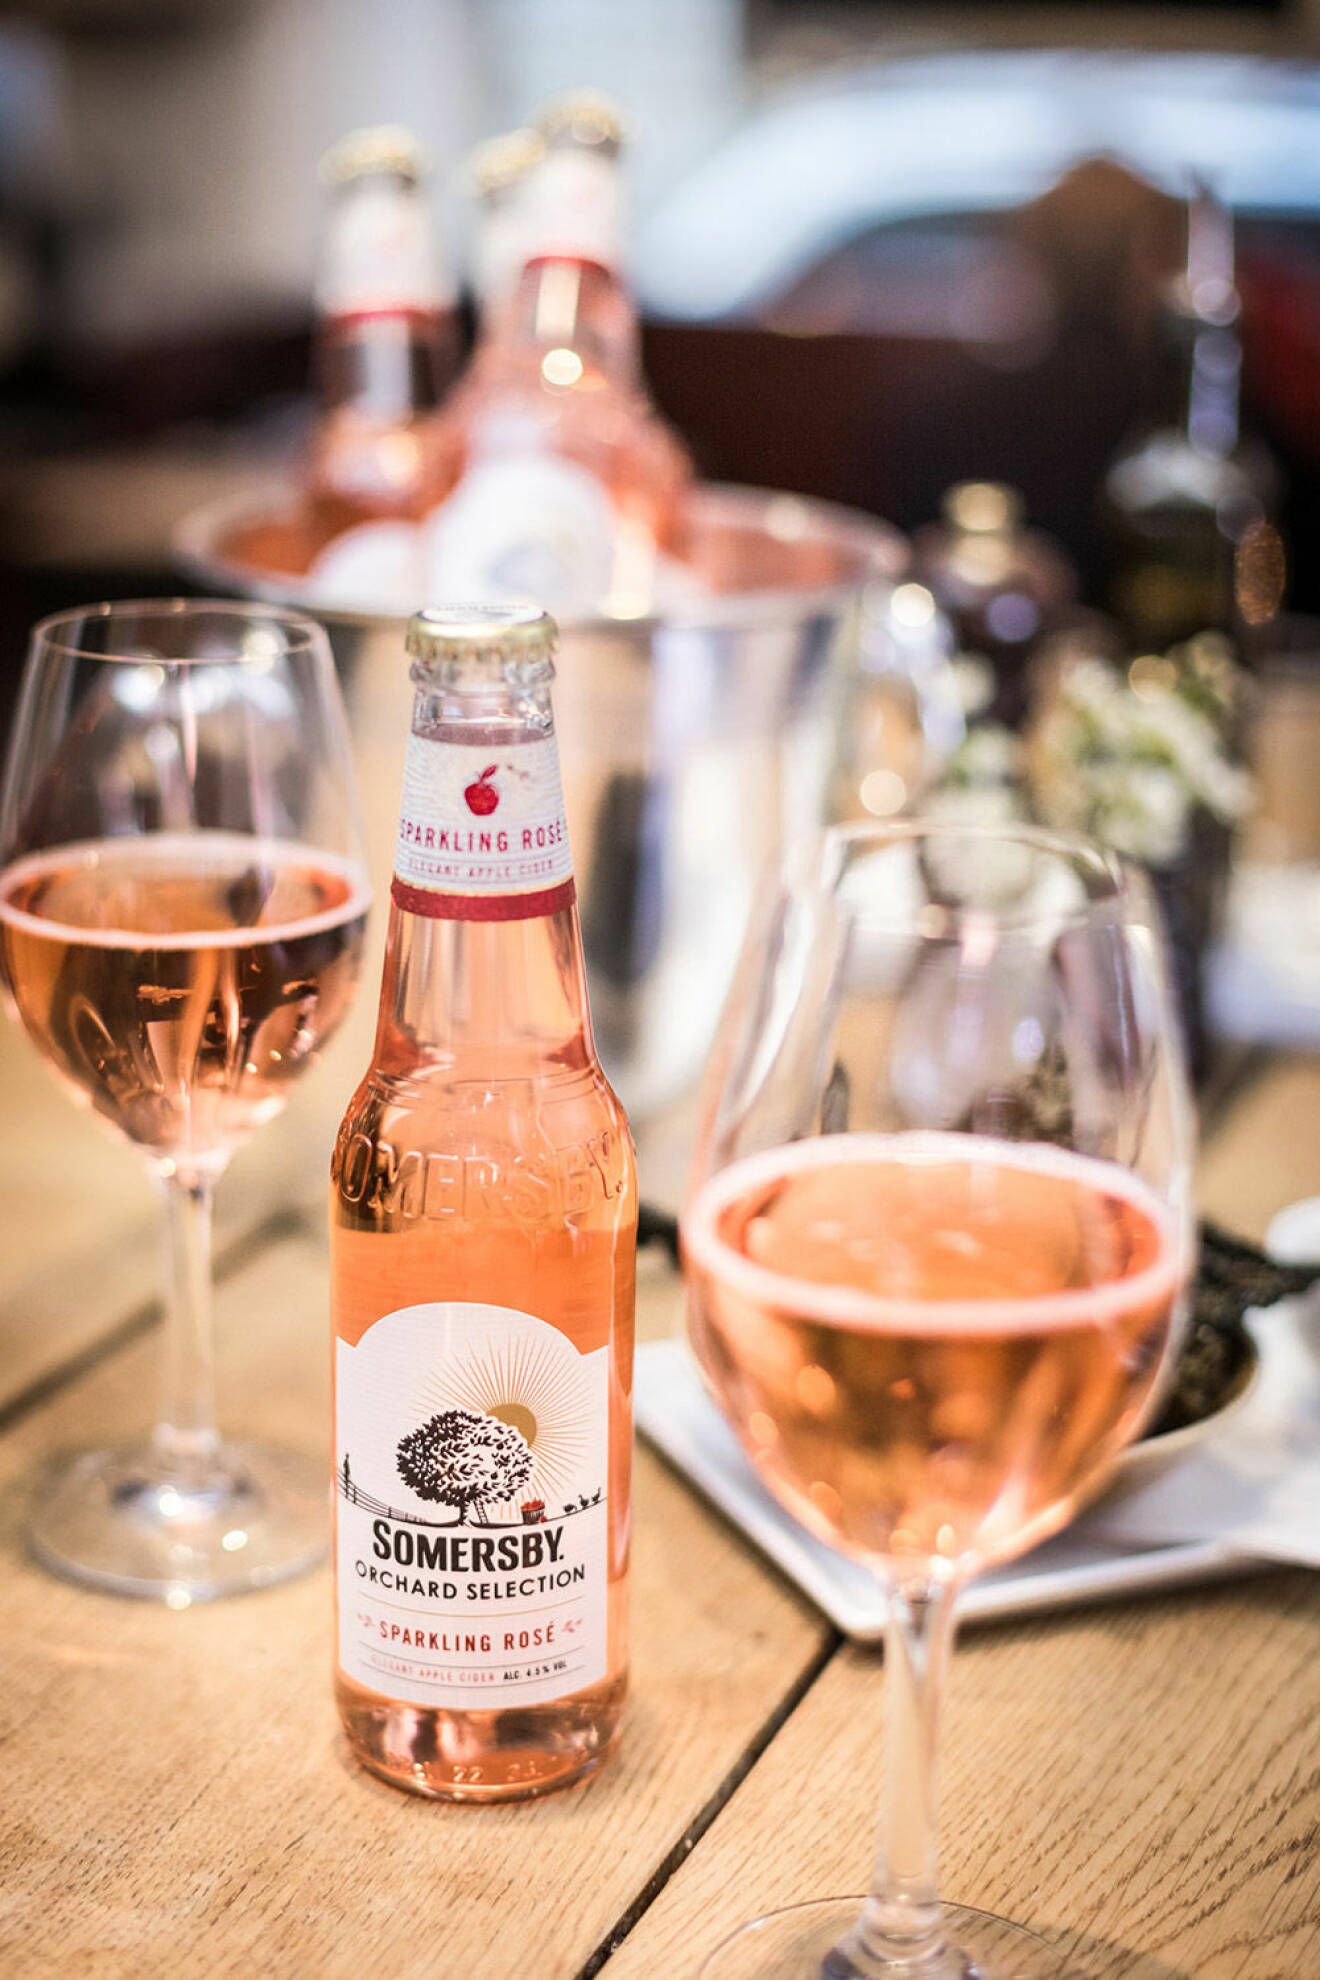 Somersby Orchard Selection Sparkling Rosé.